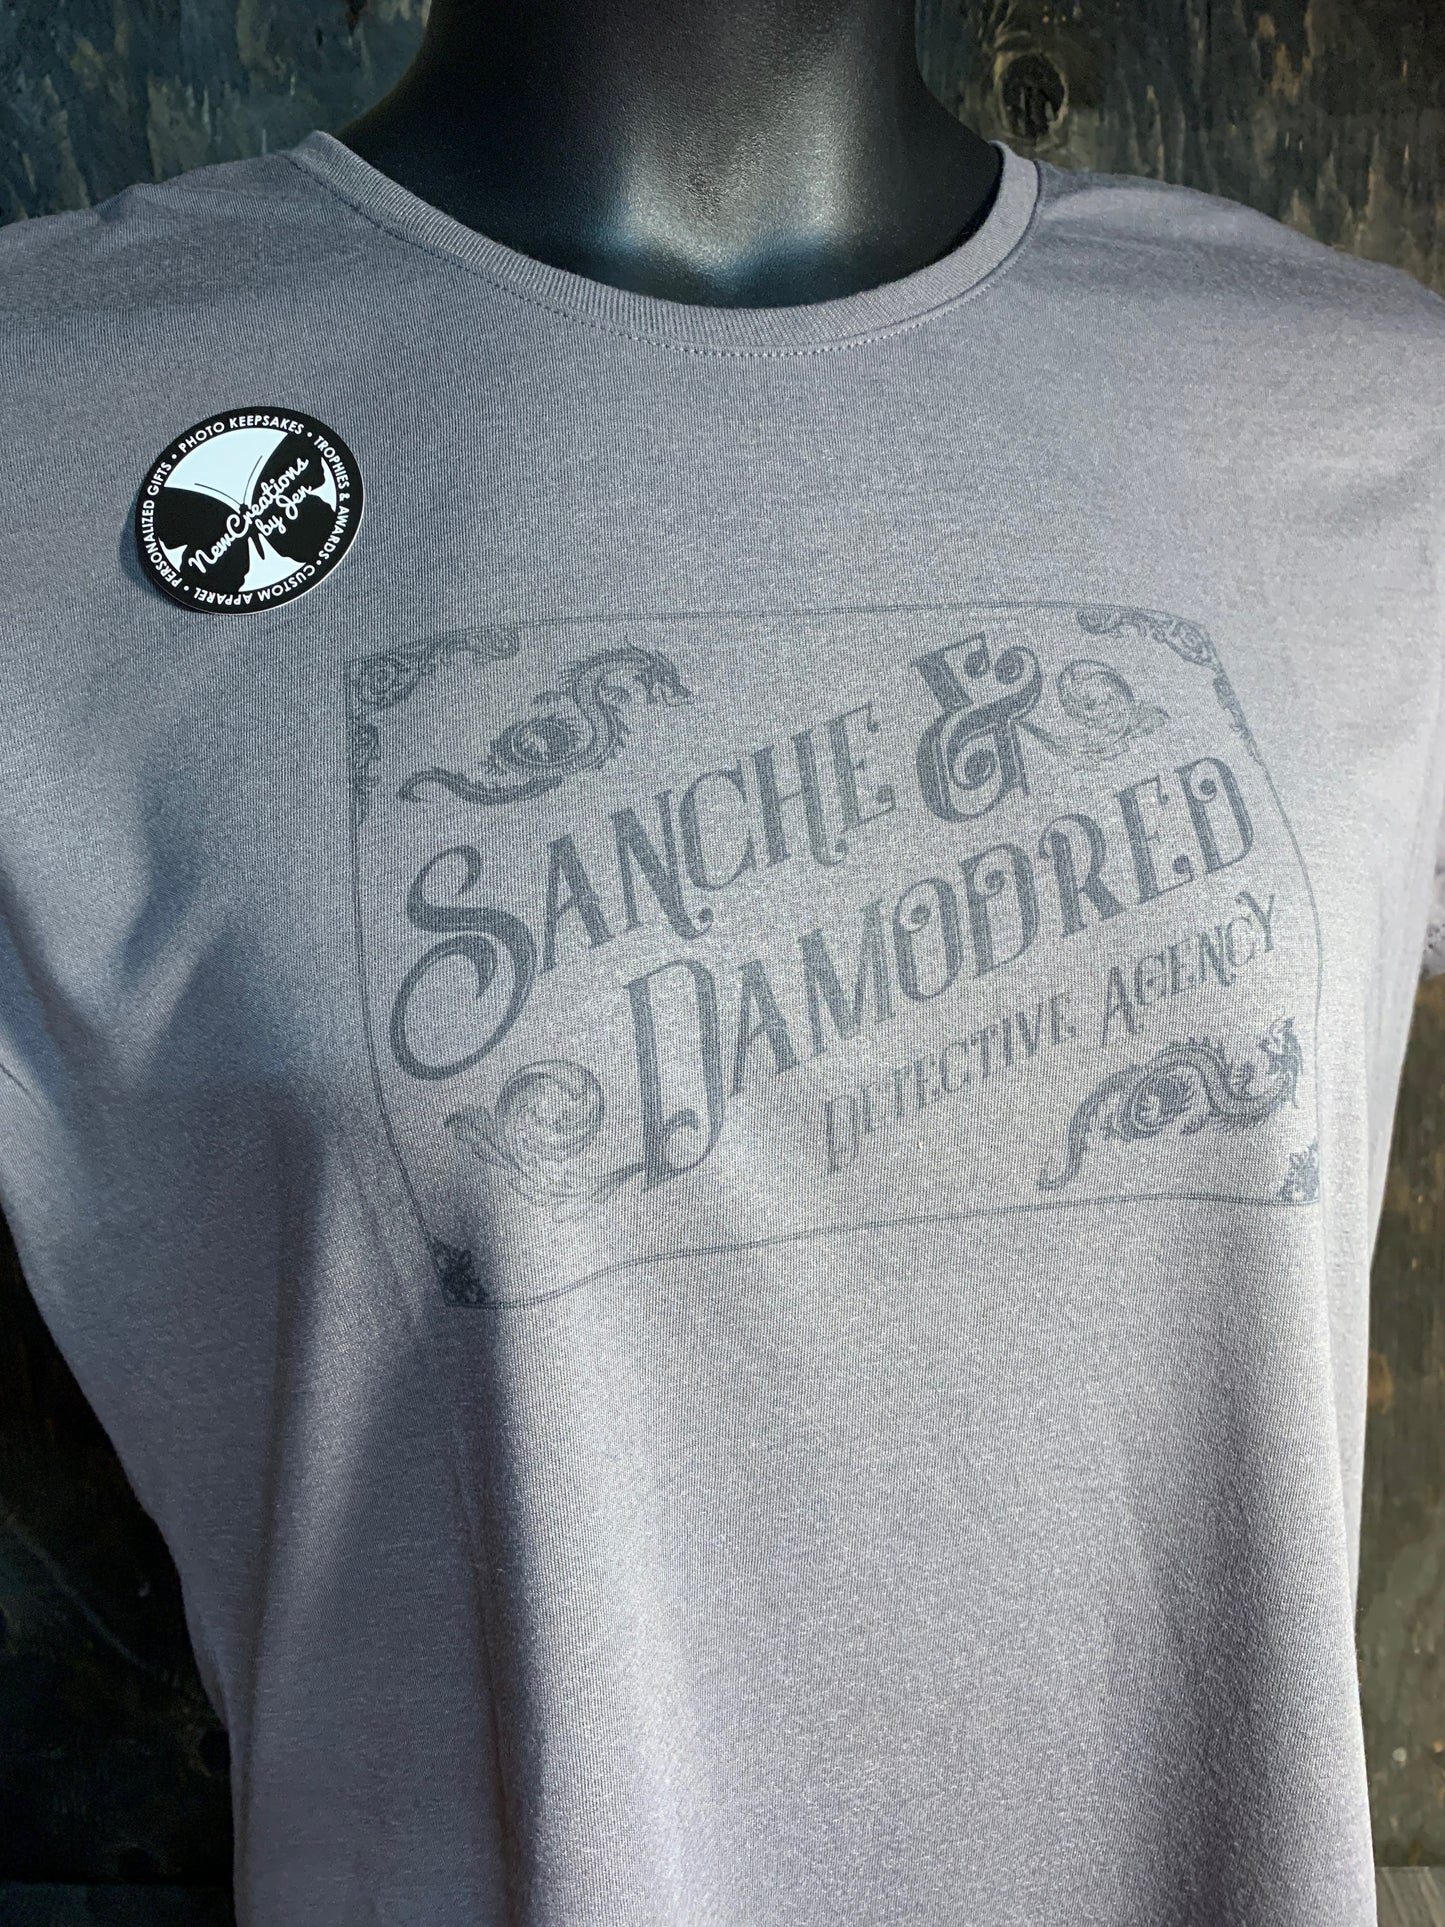 Sanche & Damodred Detective Agency - Wheel of Time Inspired  Souvenir Lightweight  Tees